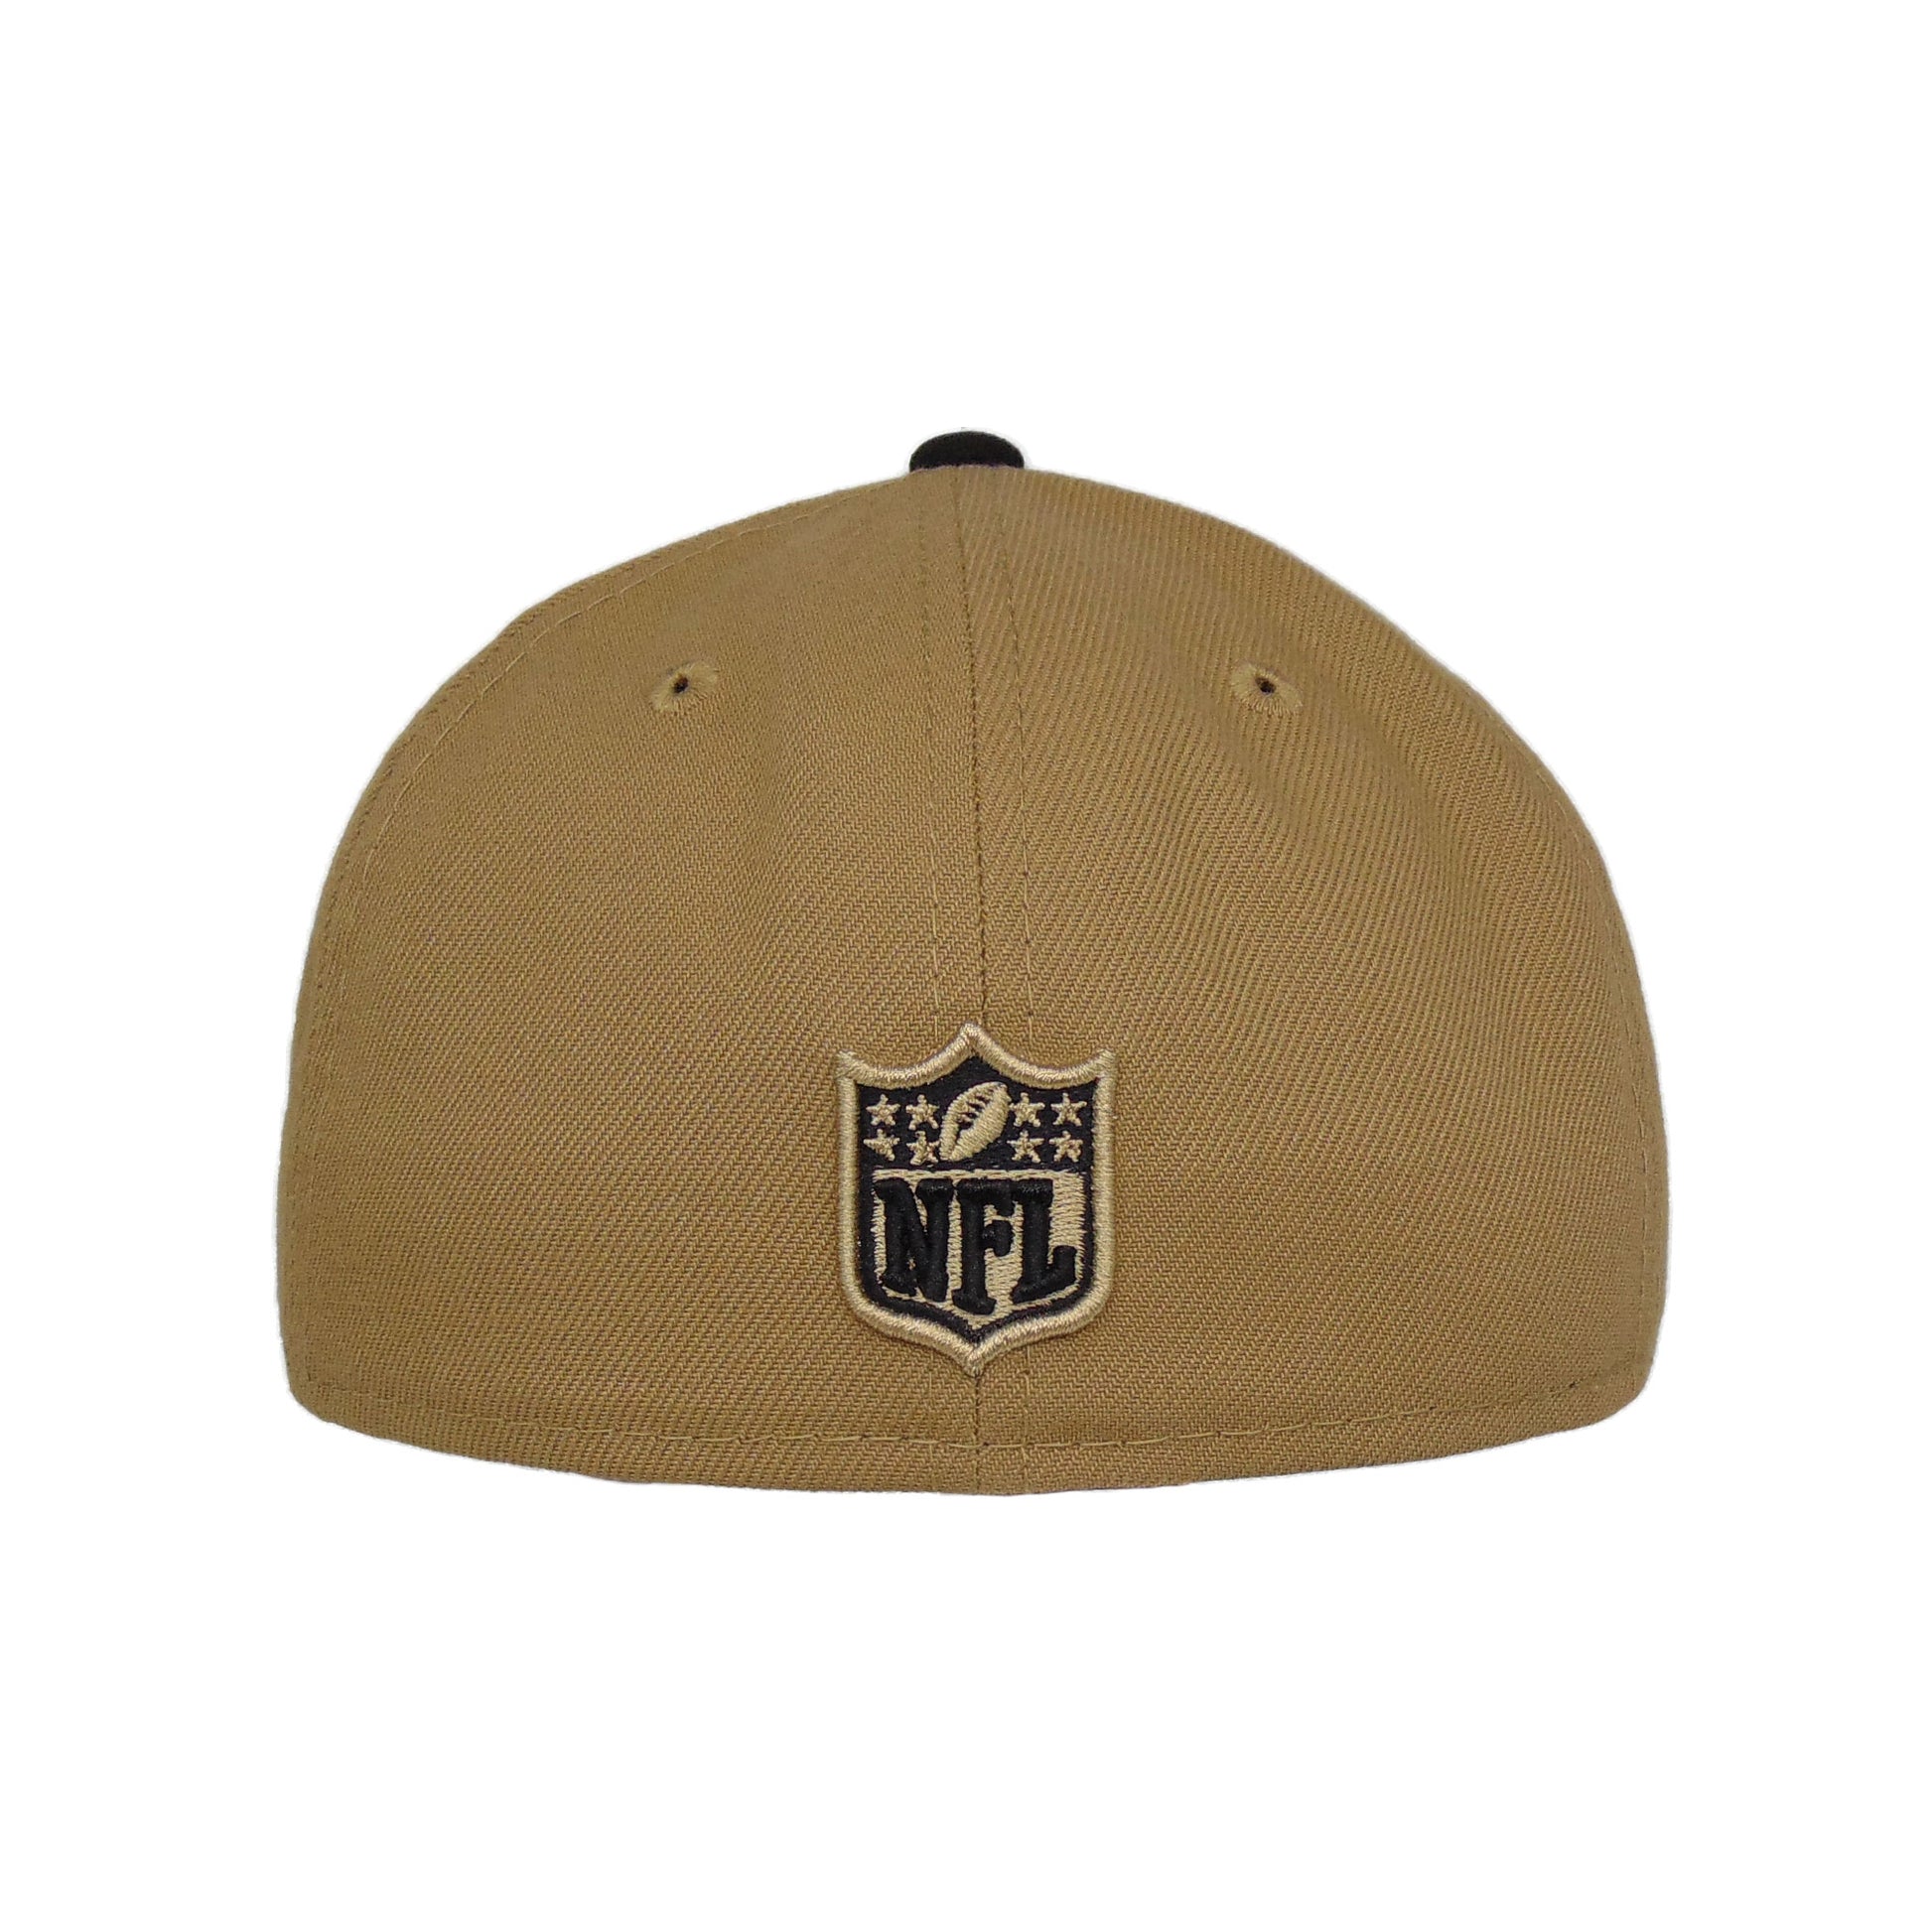 49ers olive green hat